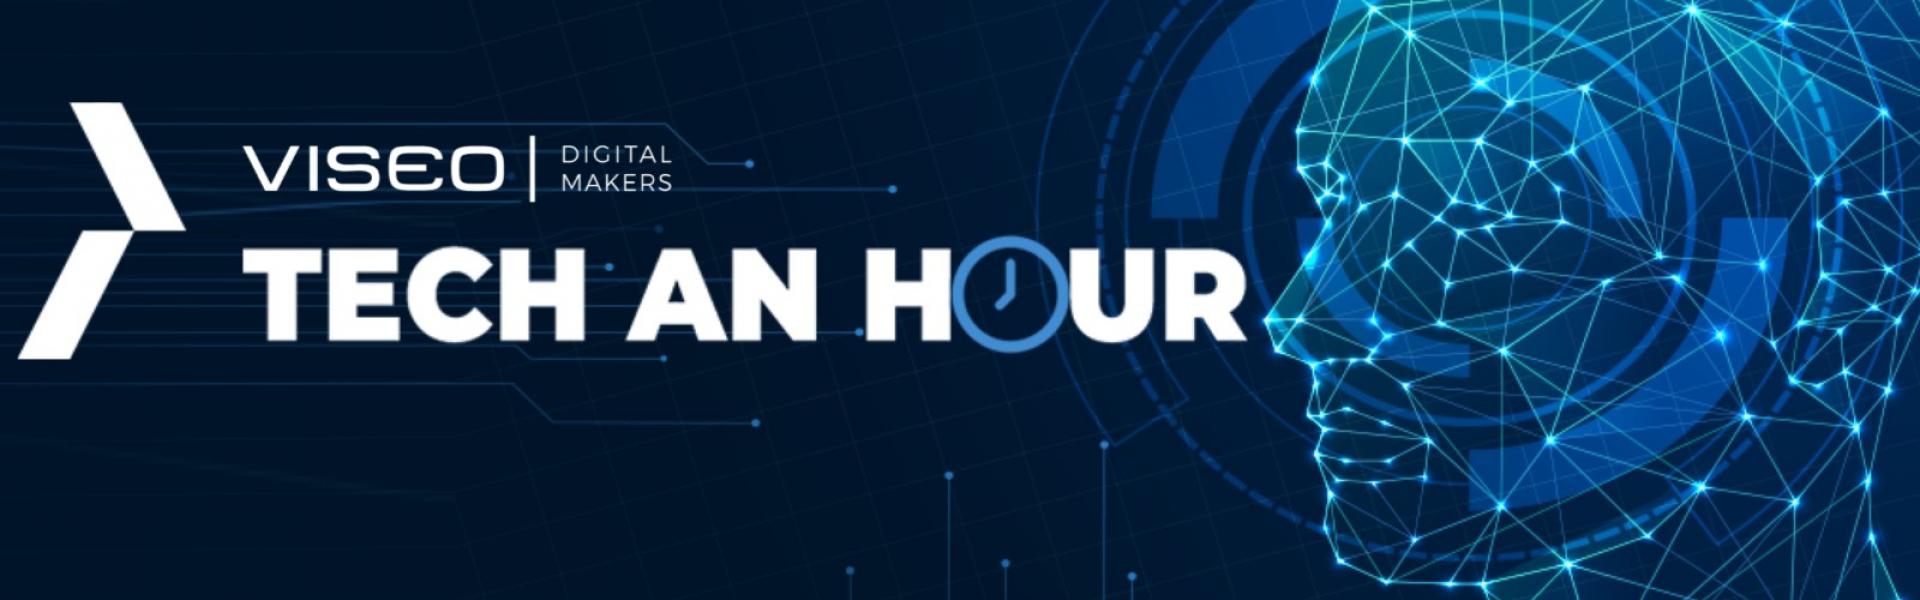 Tech an hour by VISEO